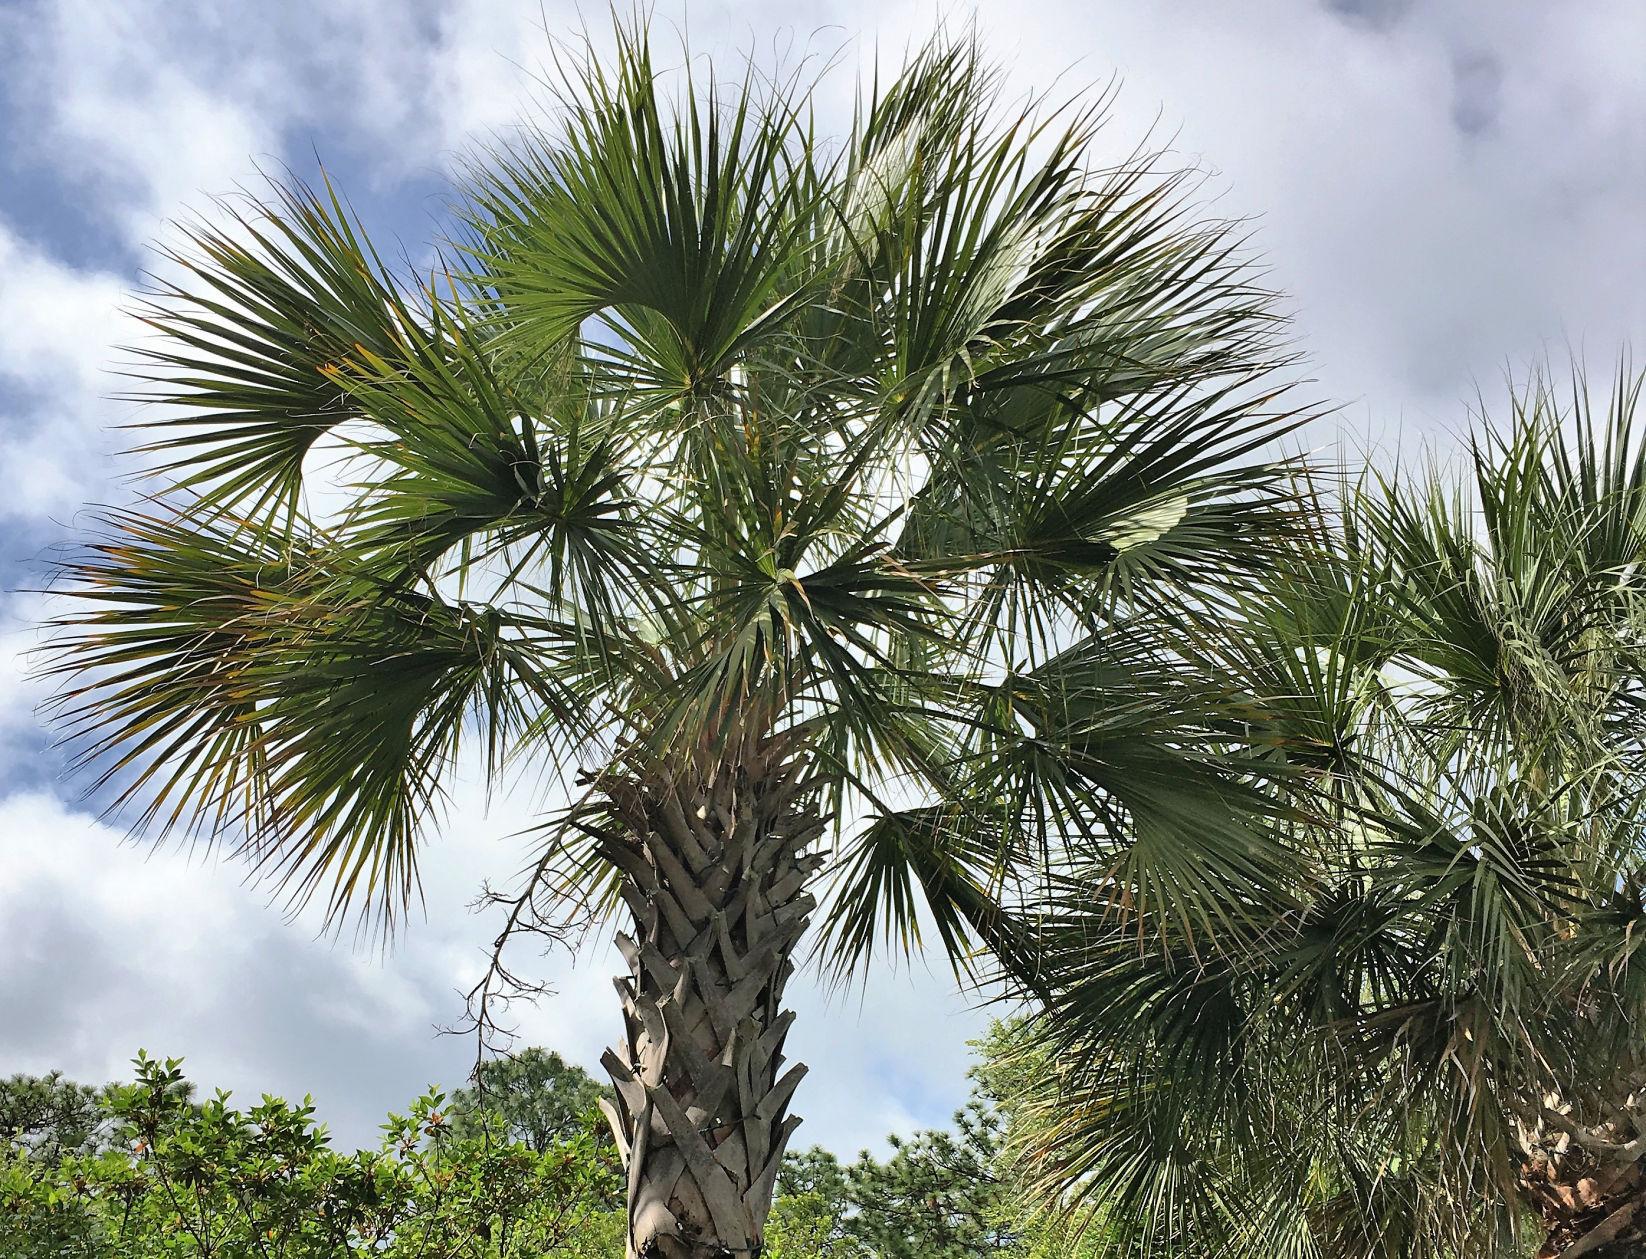 How to Draw Sabal Palm Tree - Daugherty Harioned49